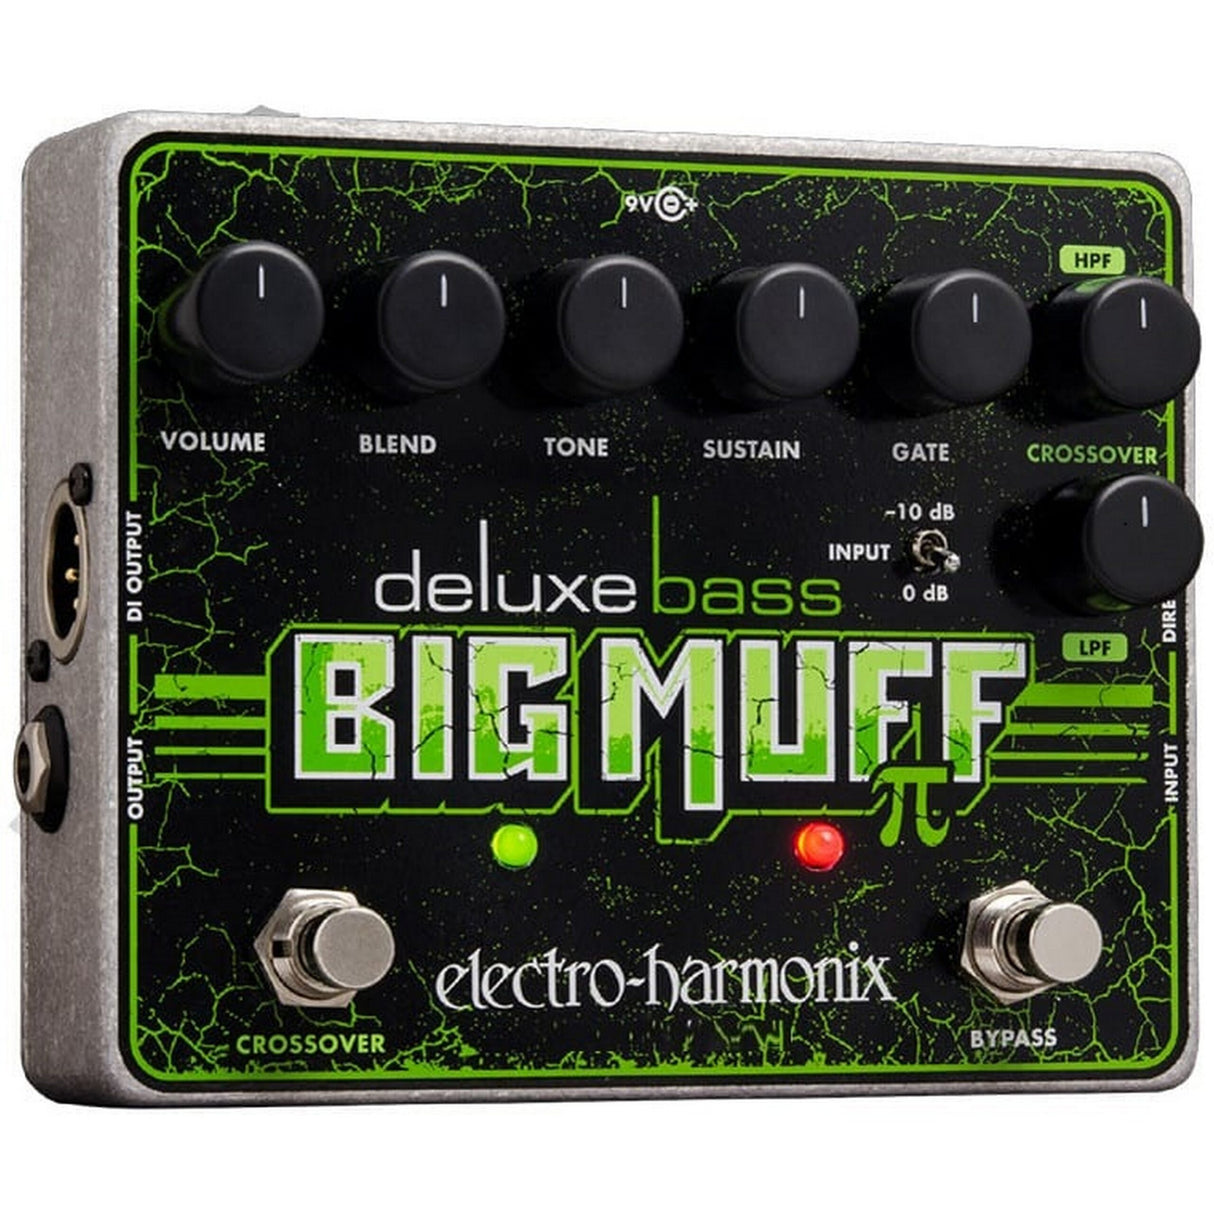 Electro-Harmonix Deluxe Bass Big Muff Pi Fuzz/Distortion/Sustainer Guitar Effects Pedal